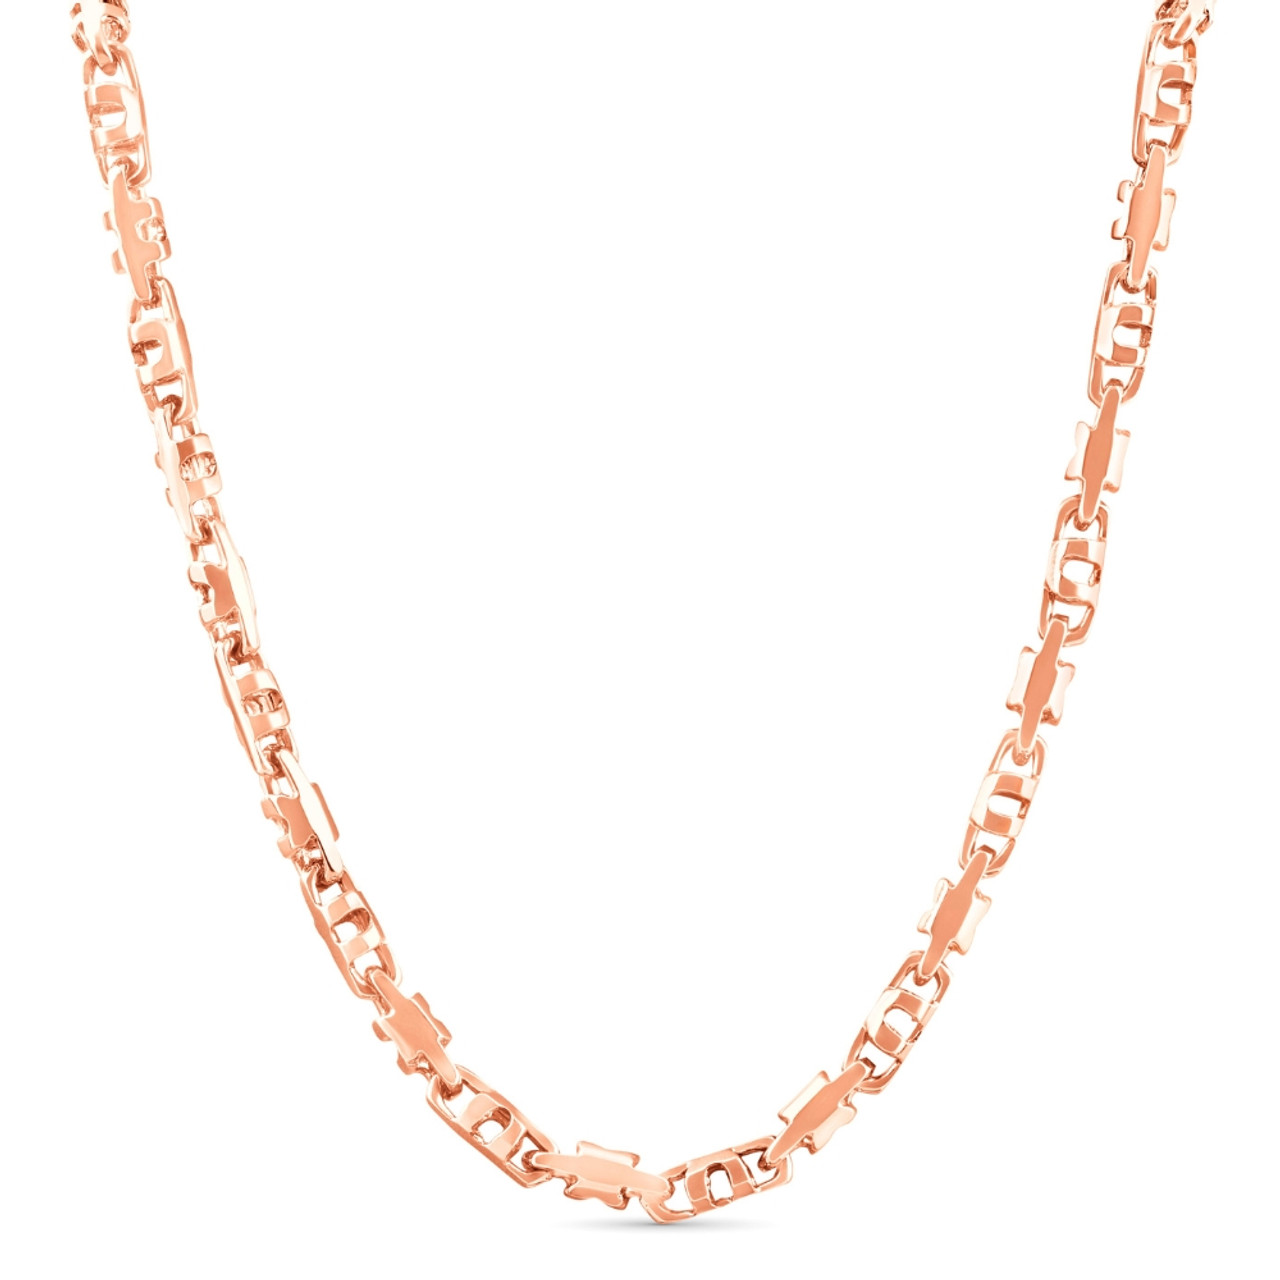 Solid 14k Rose Gold 4mm Ball Beaded Link Chain Necklace 30